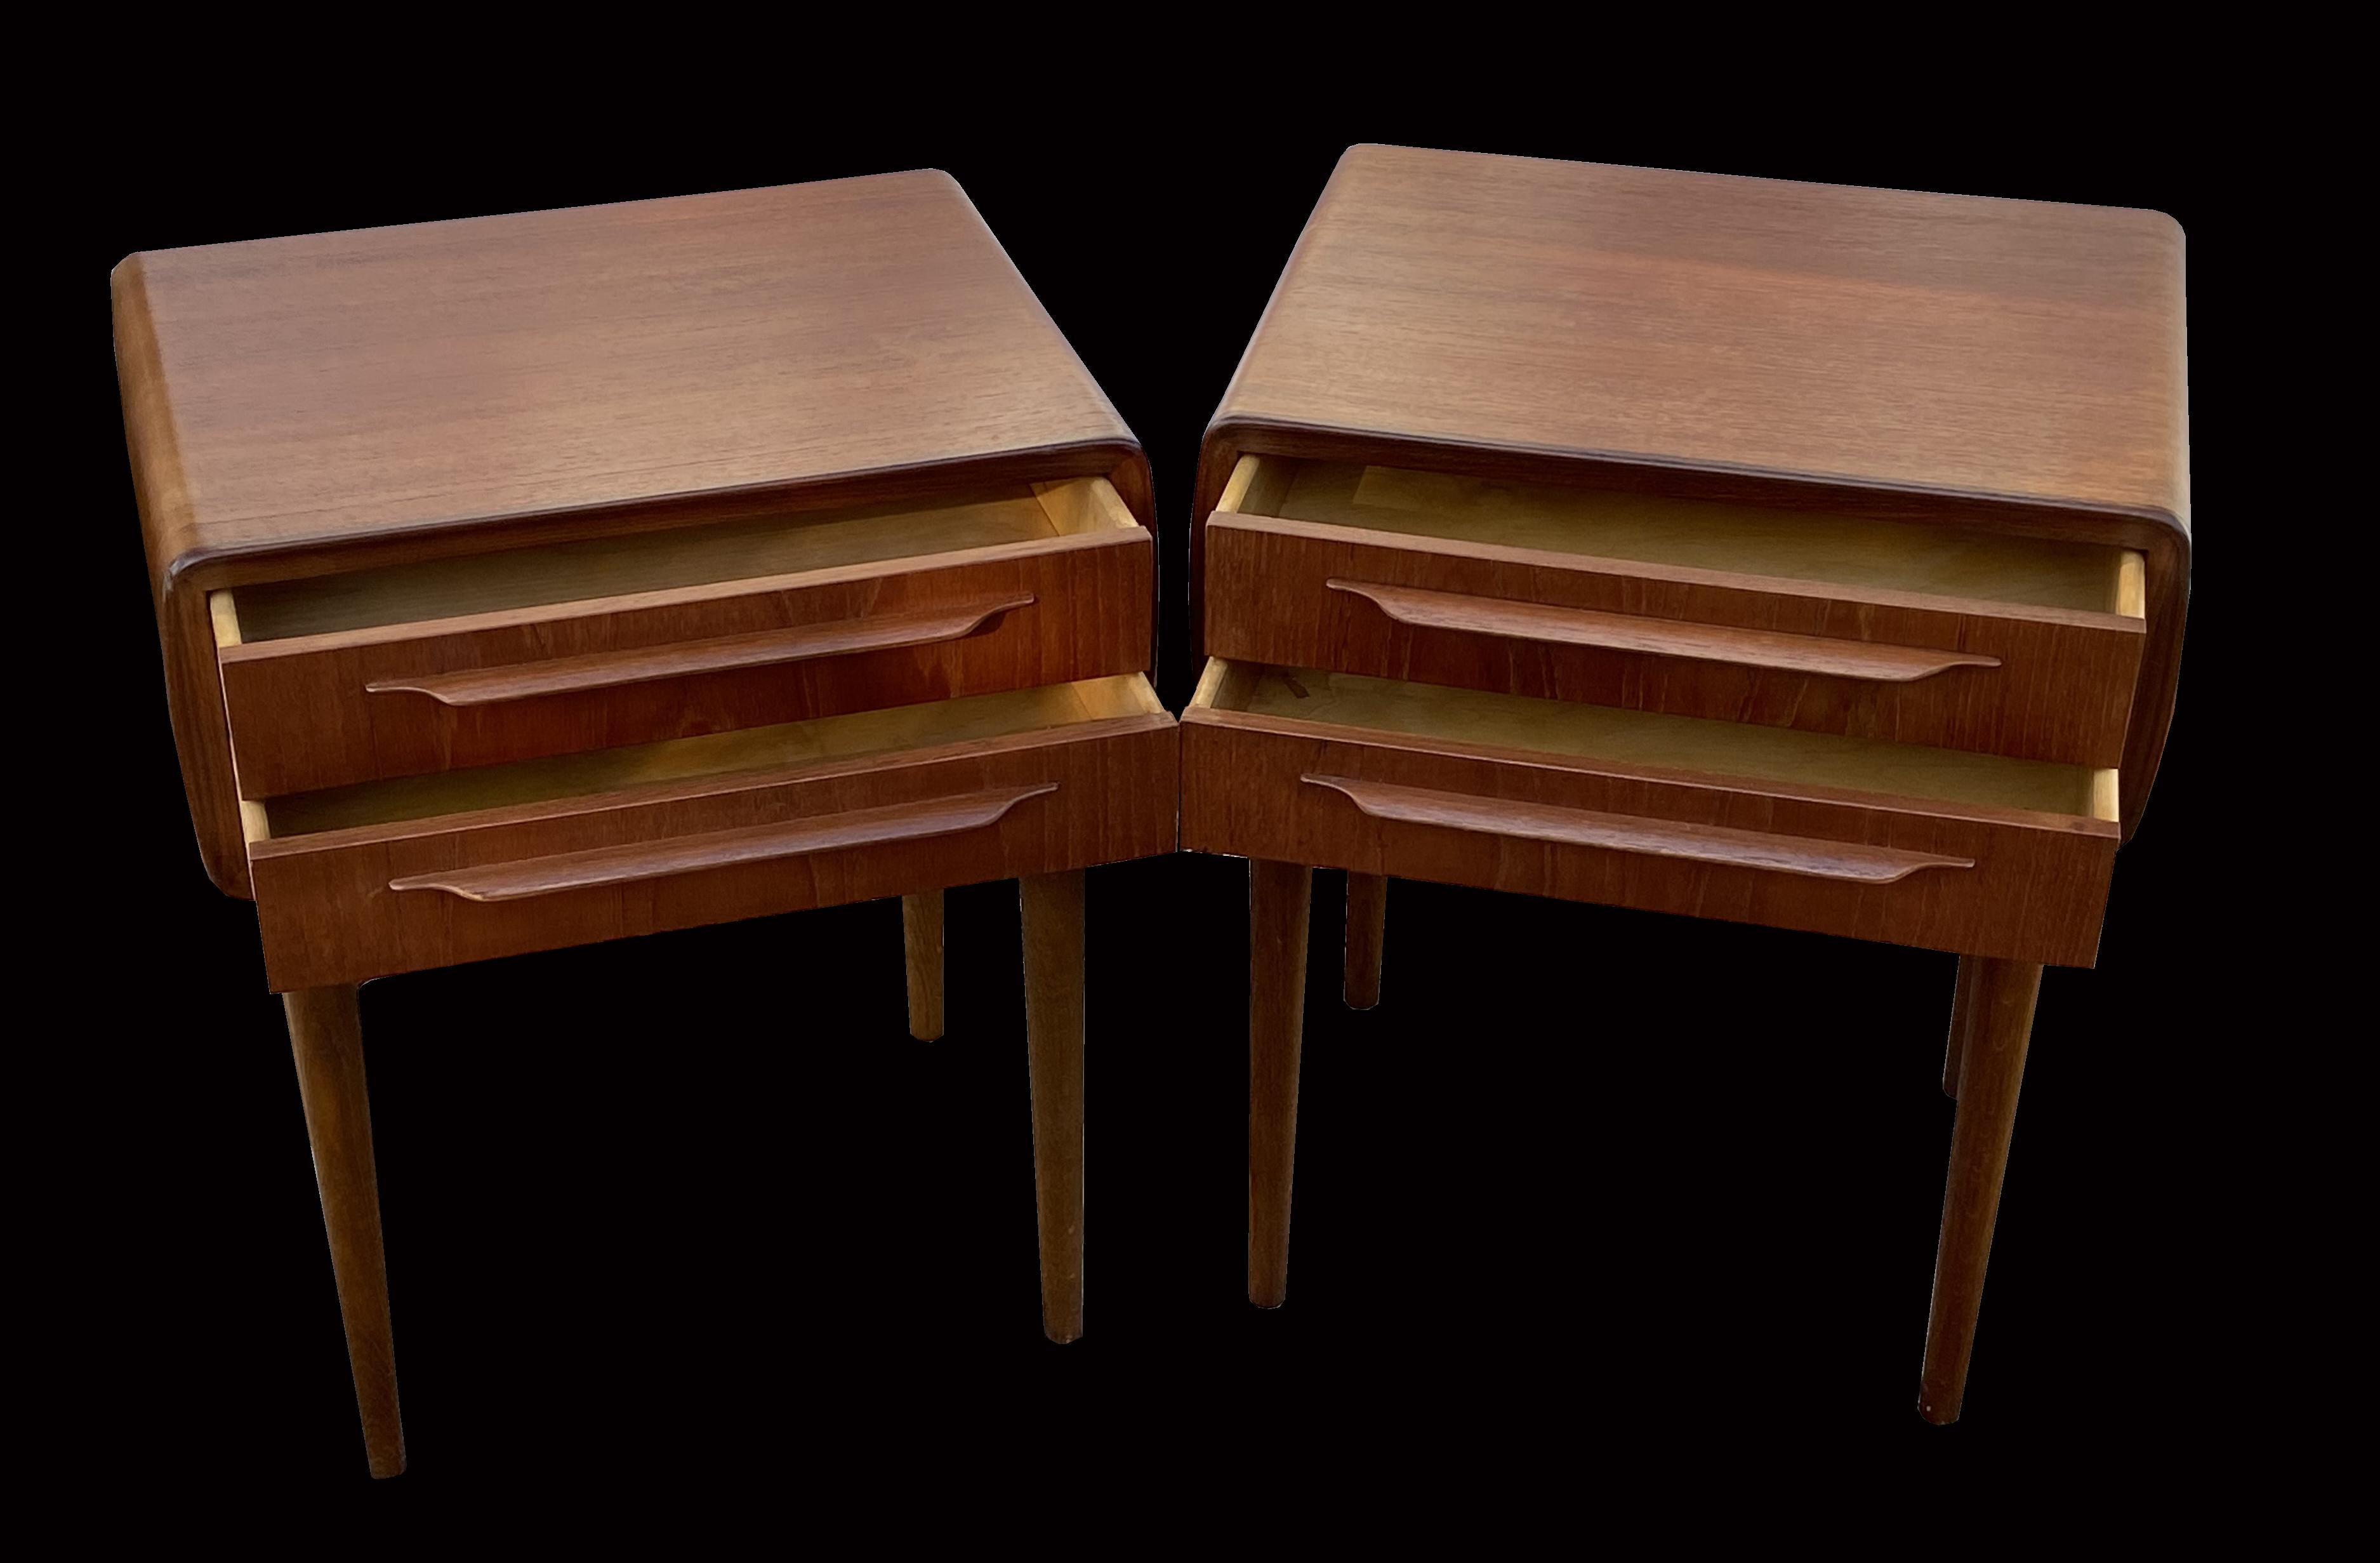 A really nice original pair if these sought after little curvy bedsides, they have a great original patina, have only been oiled and look stunning!